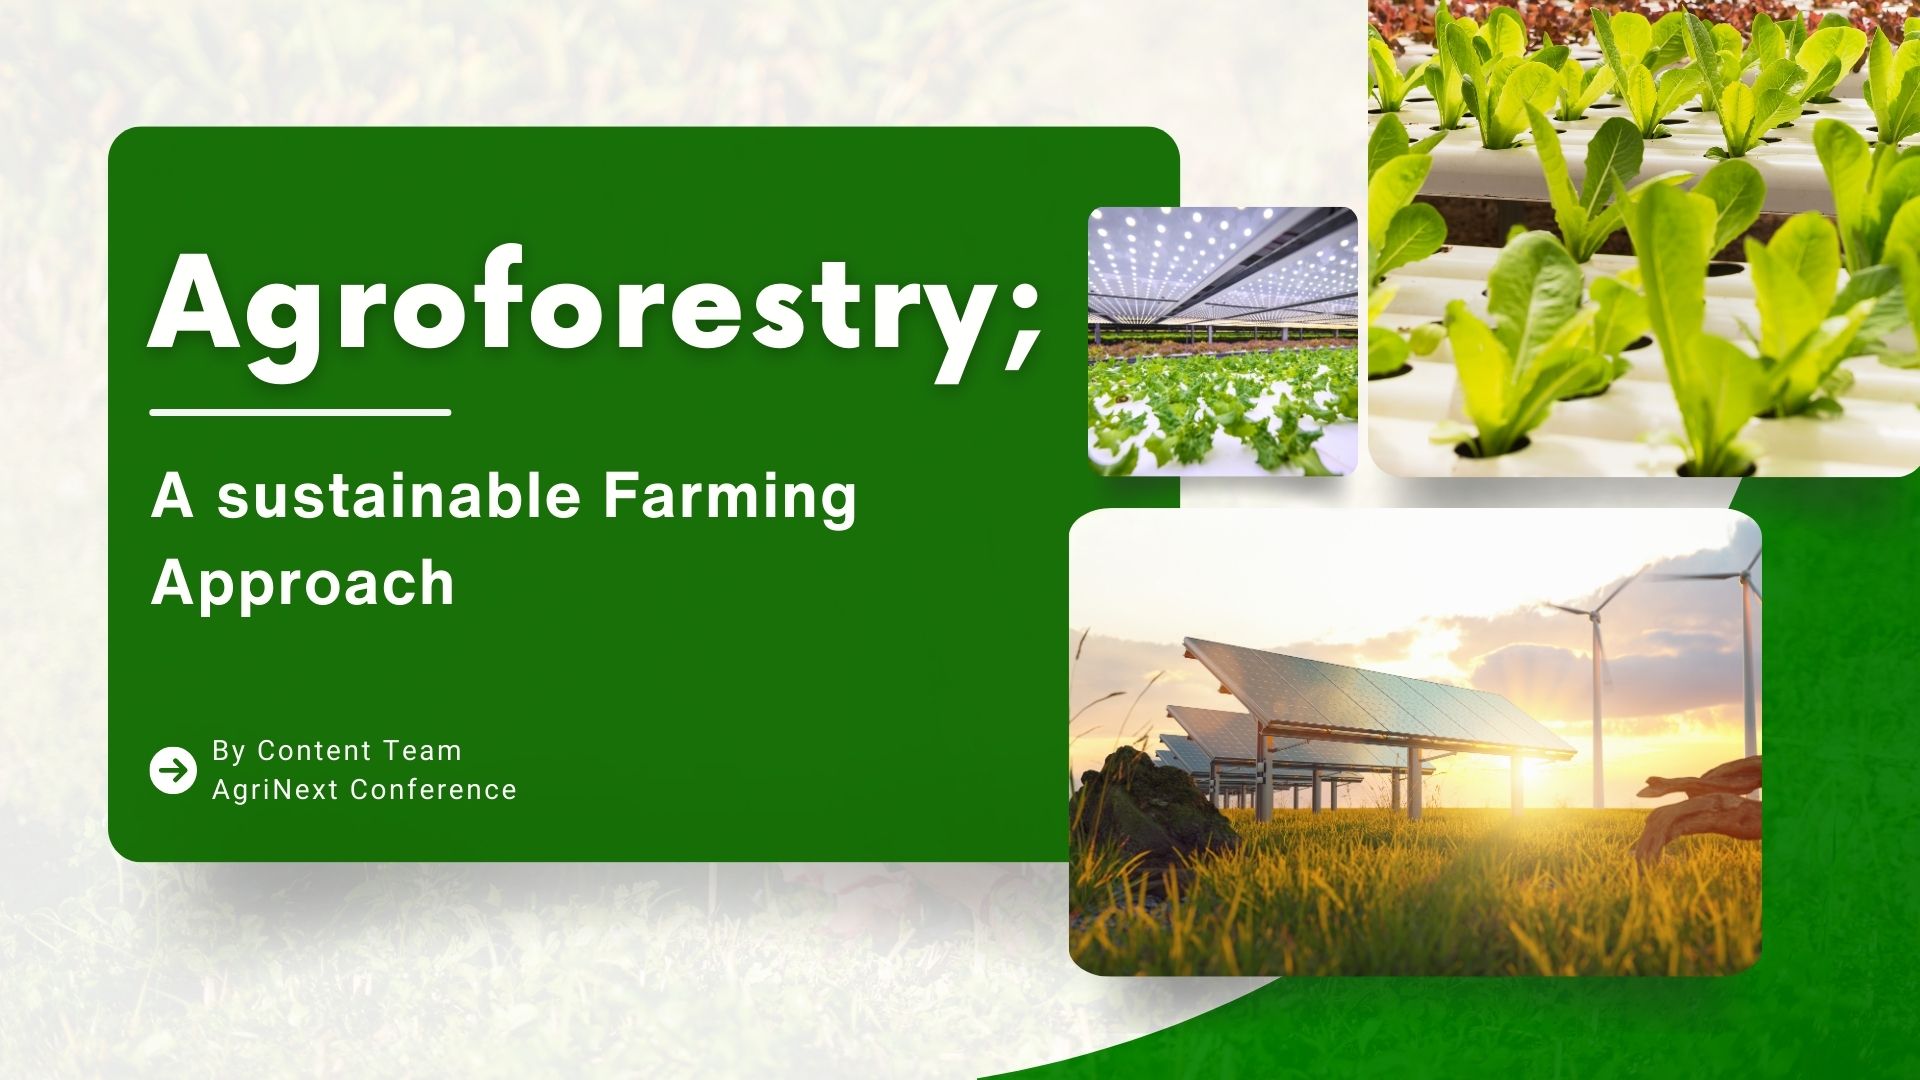 Agroforestry: A sustainable Farming Approach